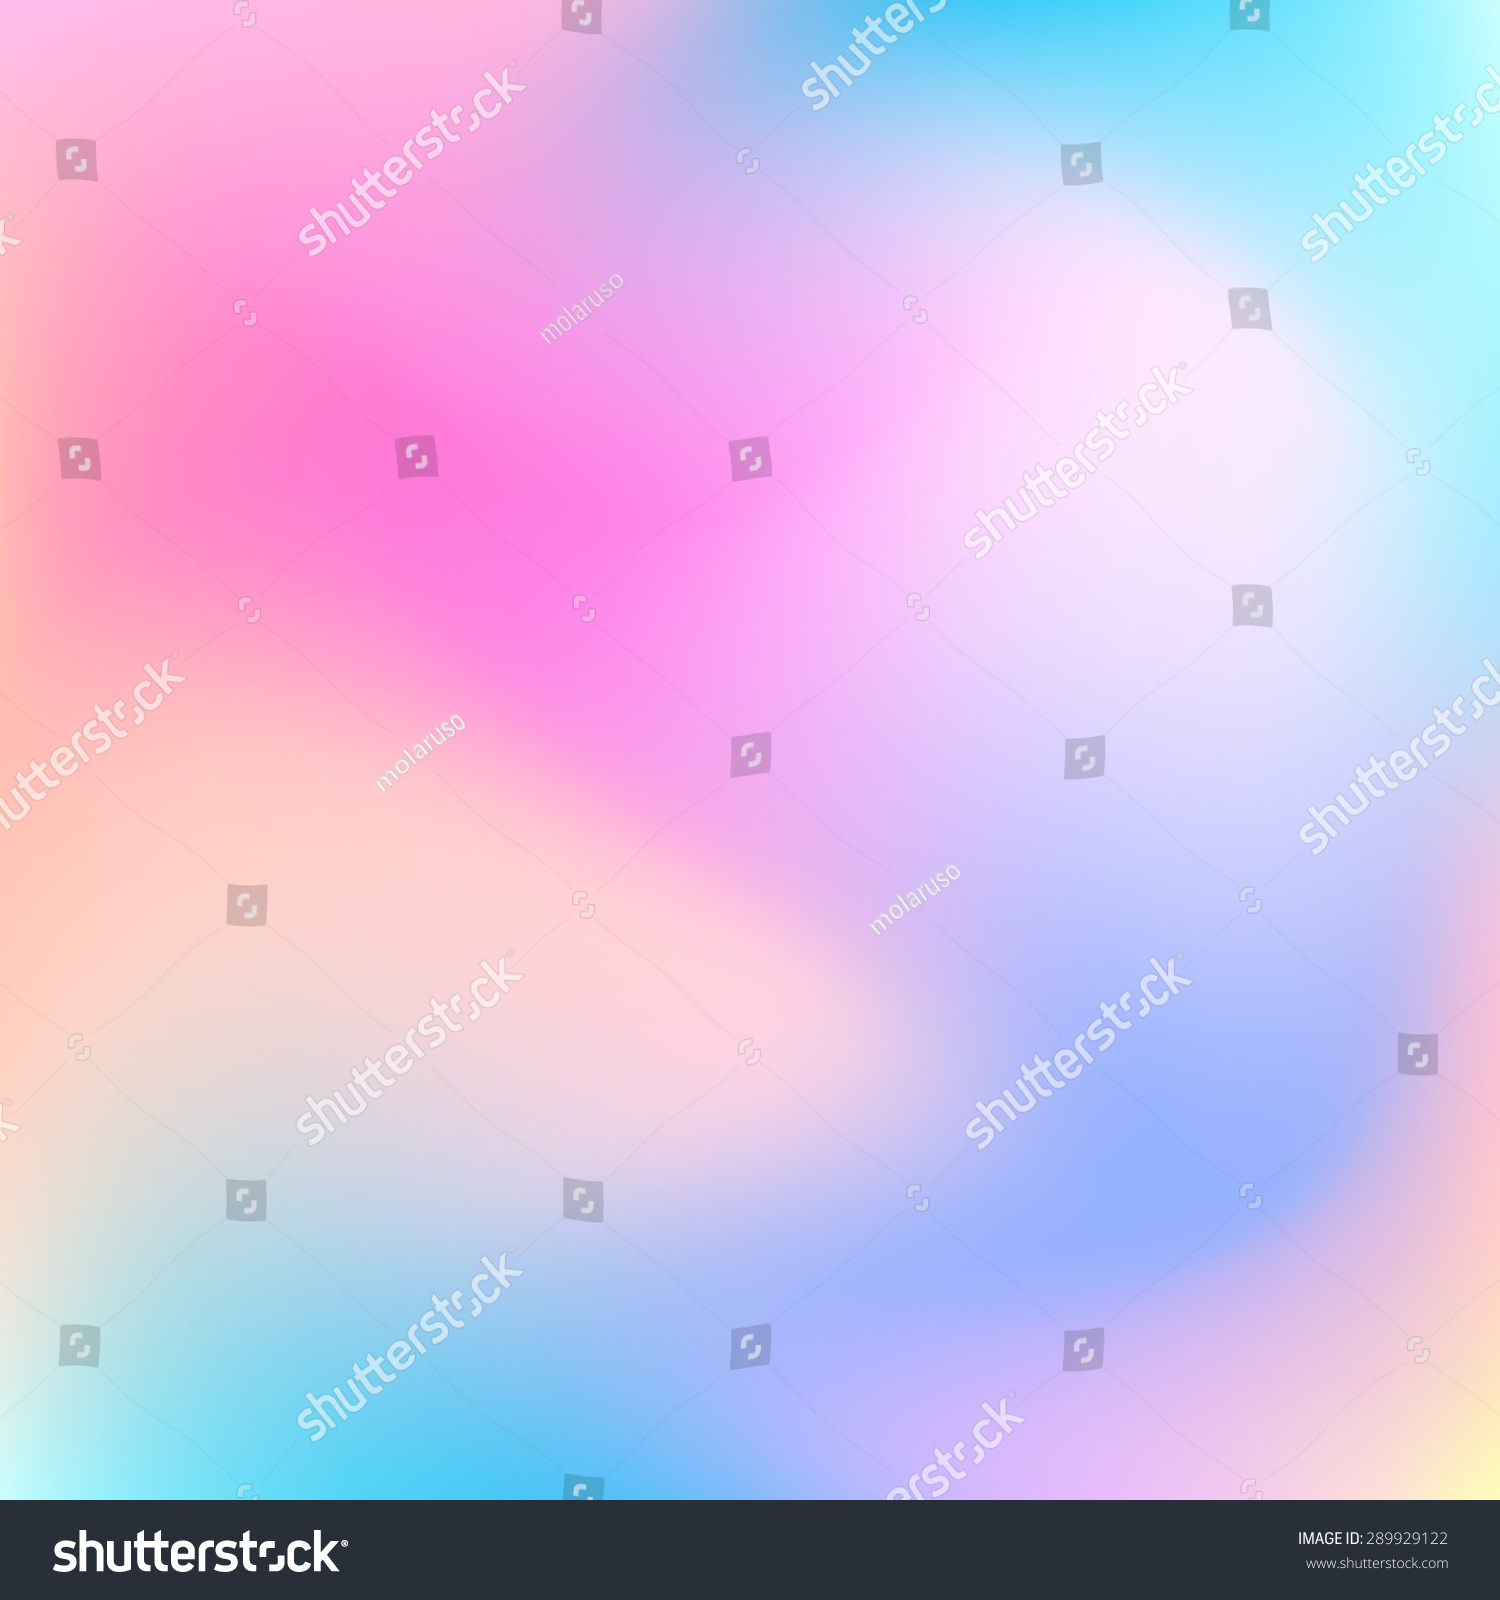 Abstract Trend Gradient Pastel Color Blur Stock Vector (Royalty Free ...